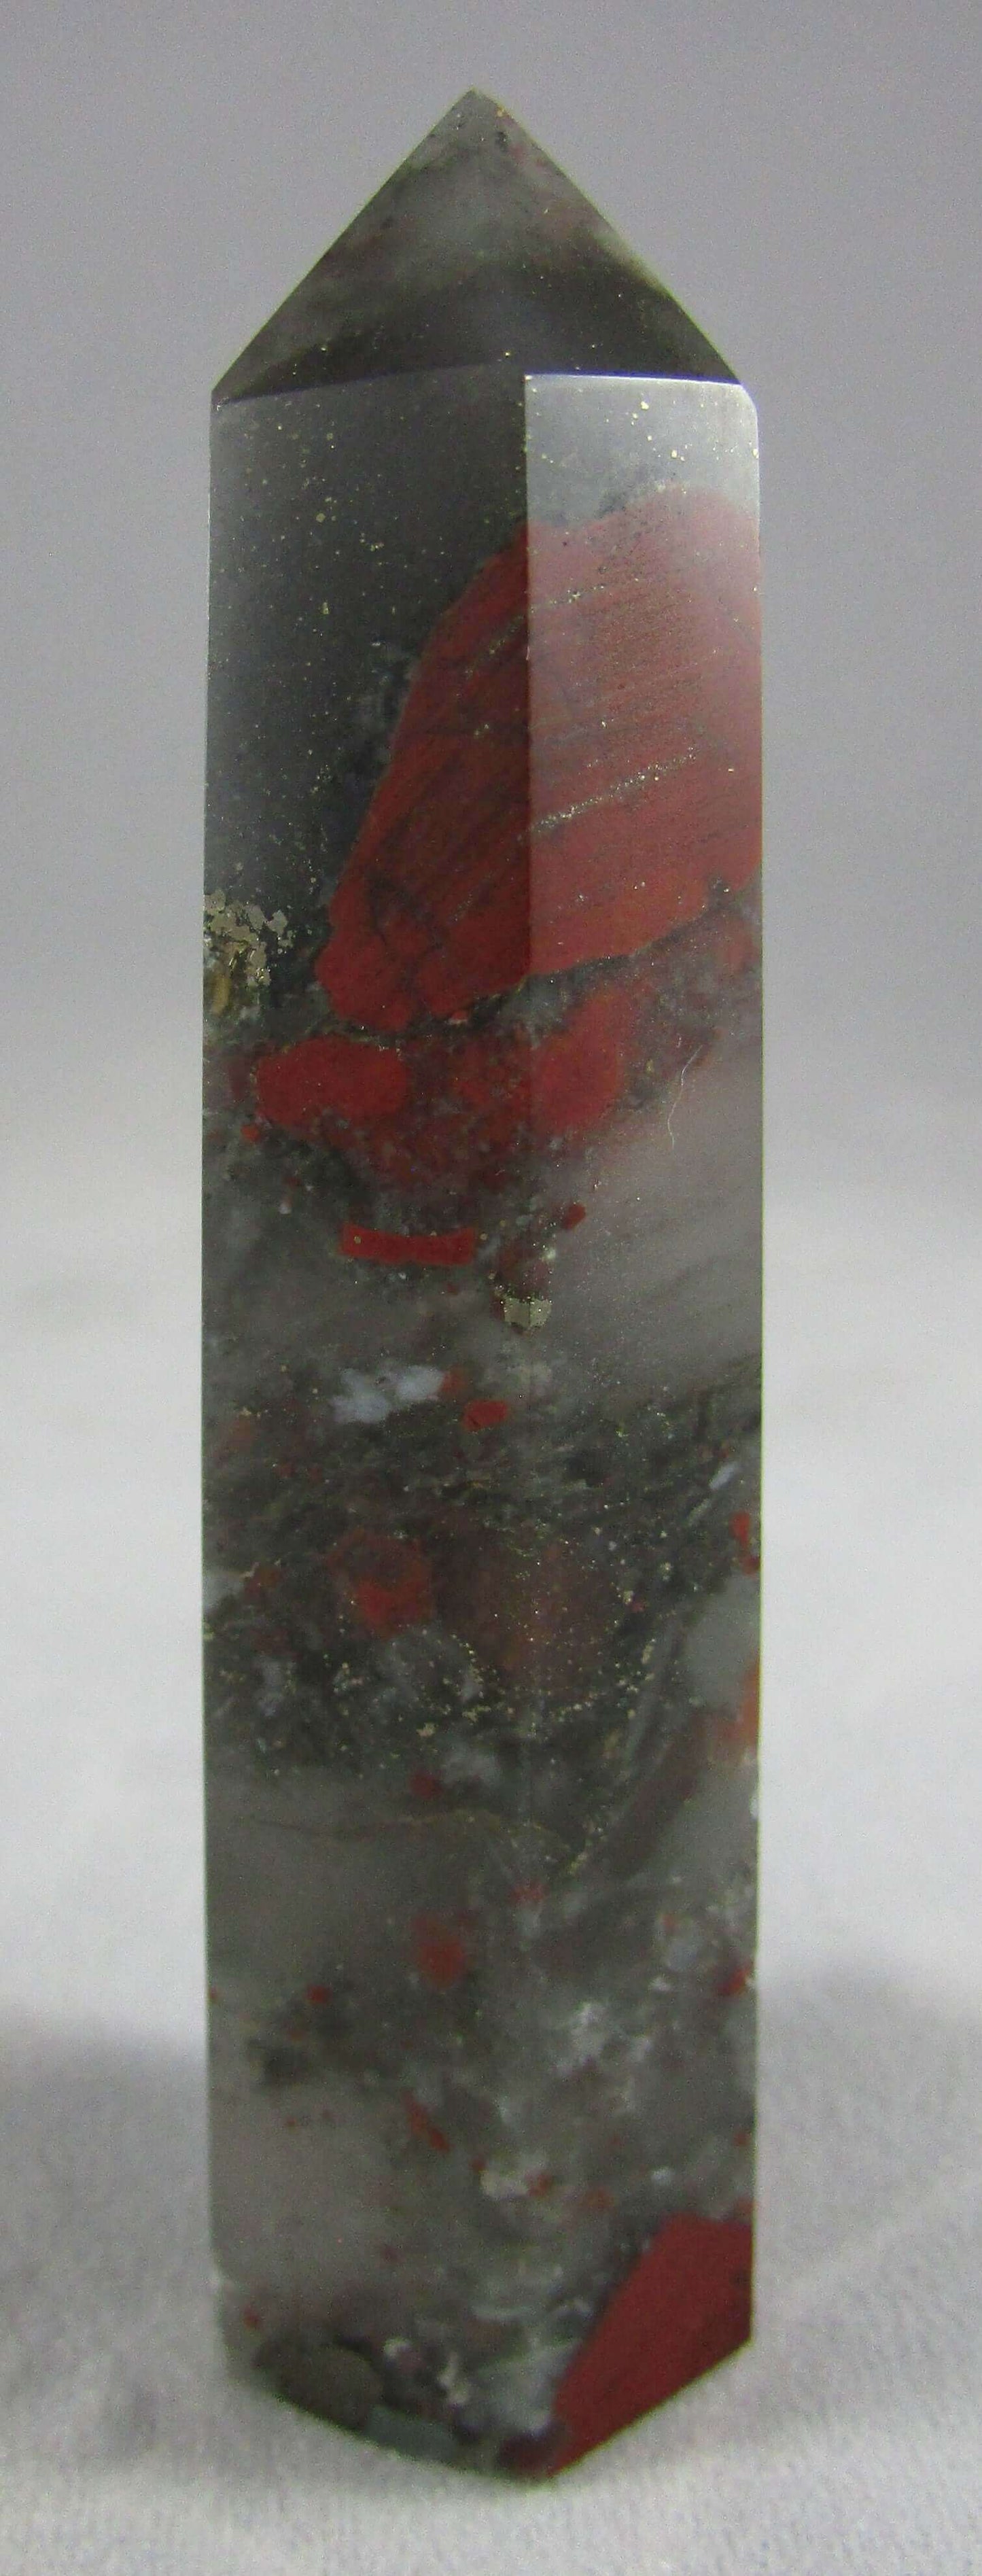 Bloodstone, South Africa (ND101) Crystals